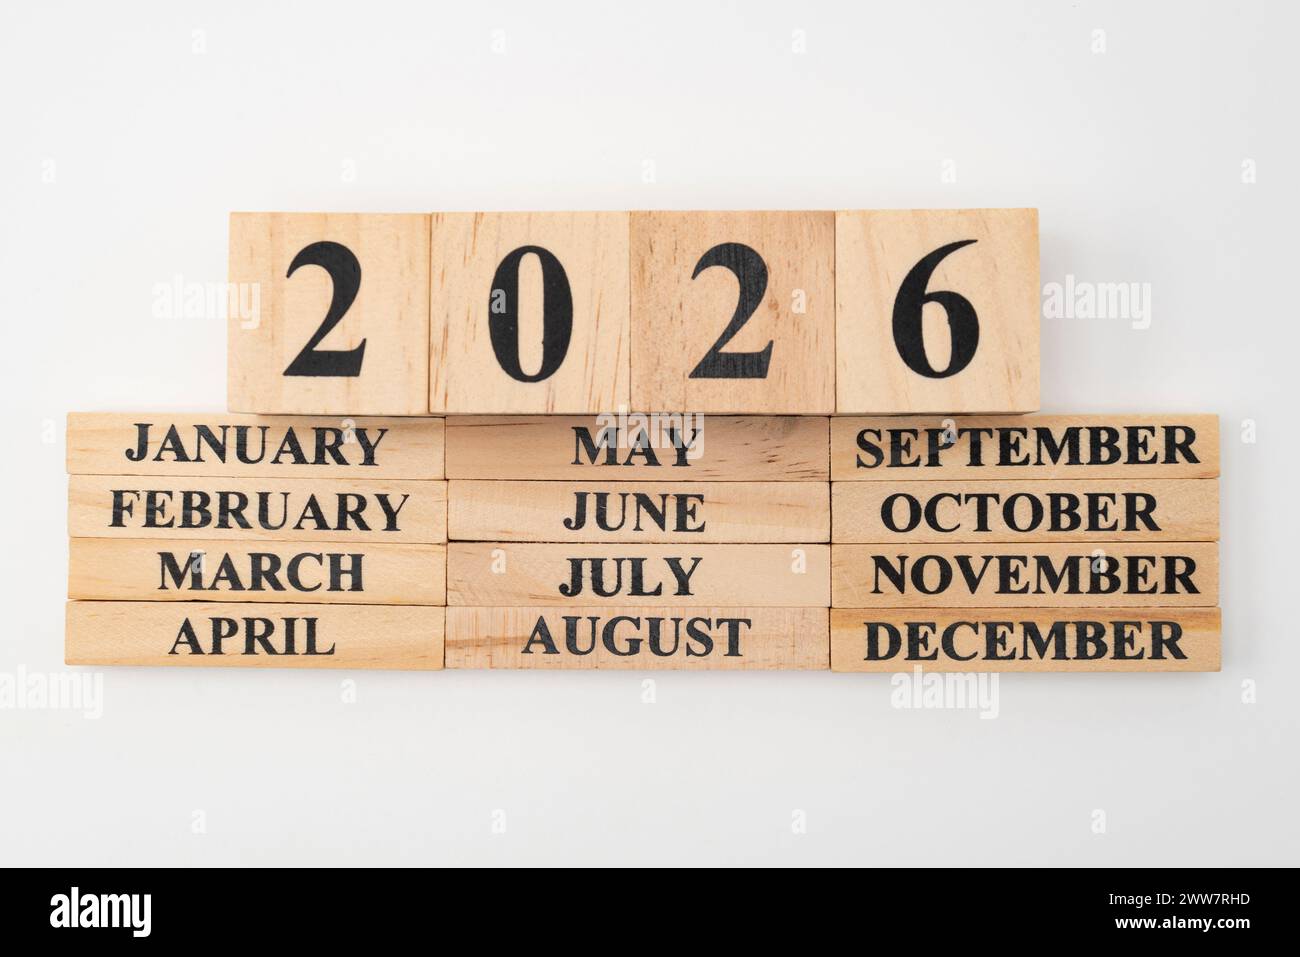 Year 2026 written on wooden cubes on top of the months of the year written on twelve rectangular pieces of wood. Isolated on white background. Stock Photo